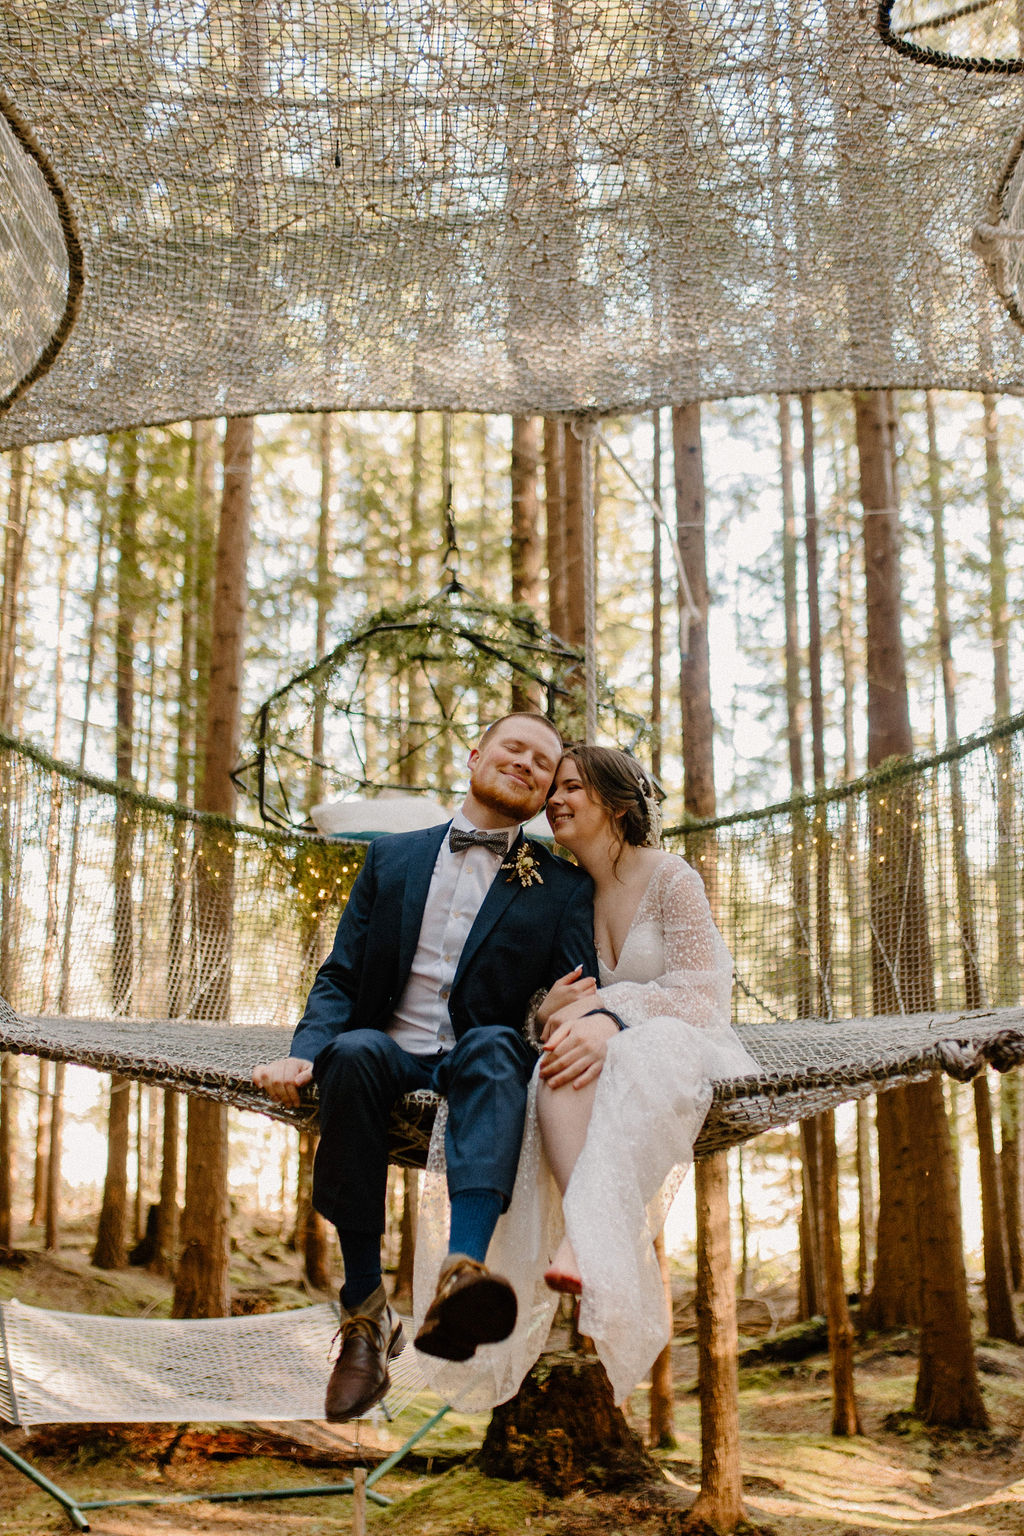 Beautiful Bride and Groom having a Washington elopement at the Emerald forest